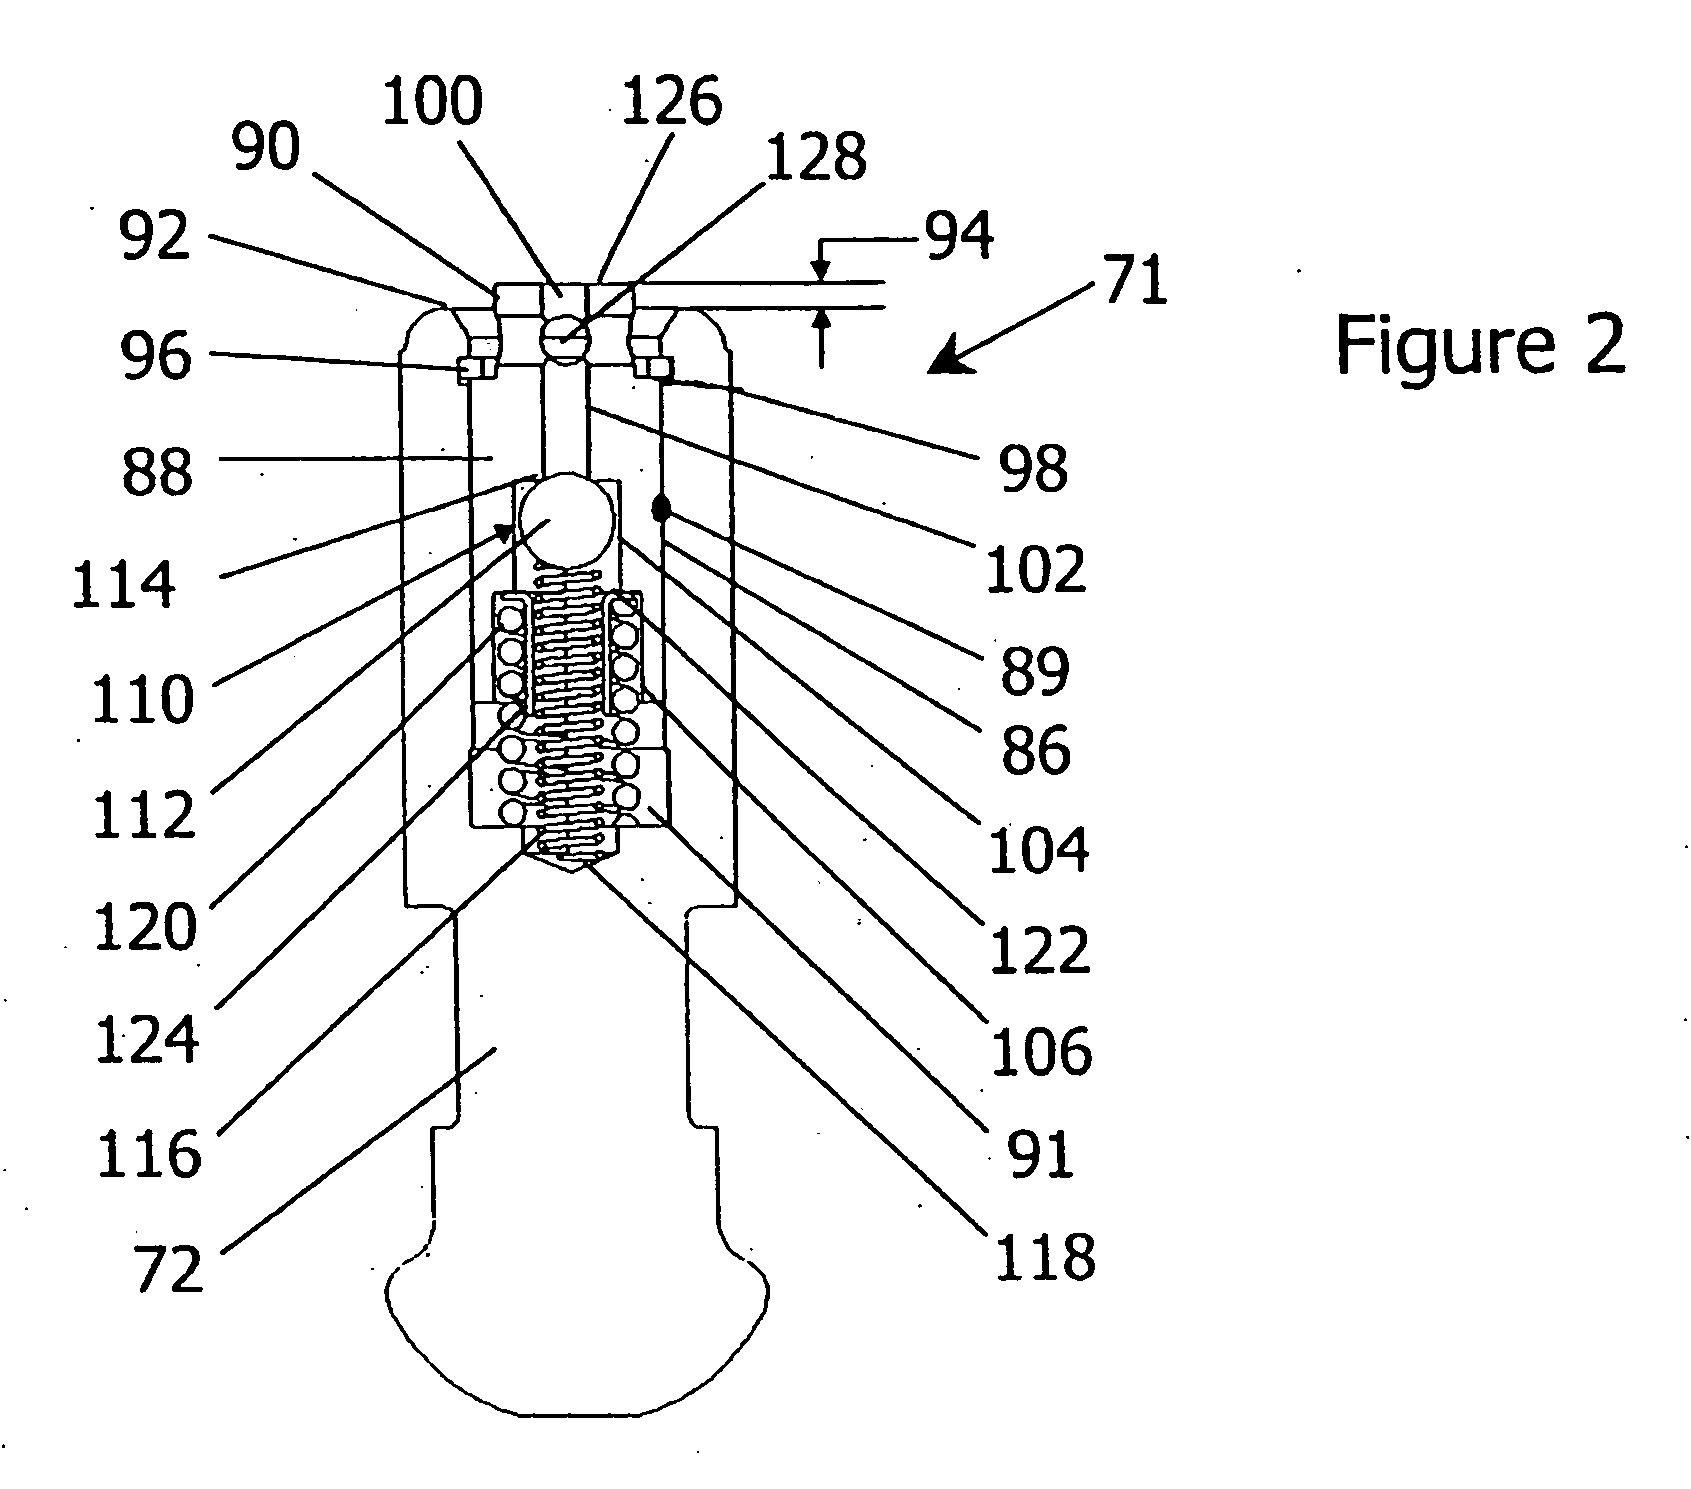 Apparatus and method for retarding an engine with an exhaust brake and a compression release brake